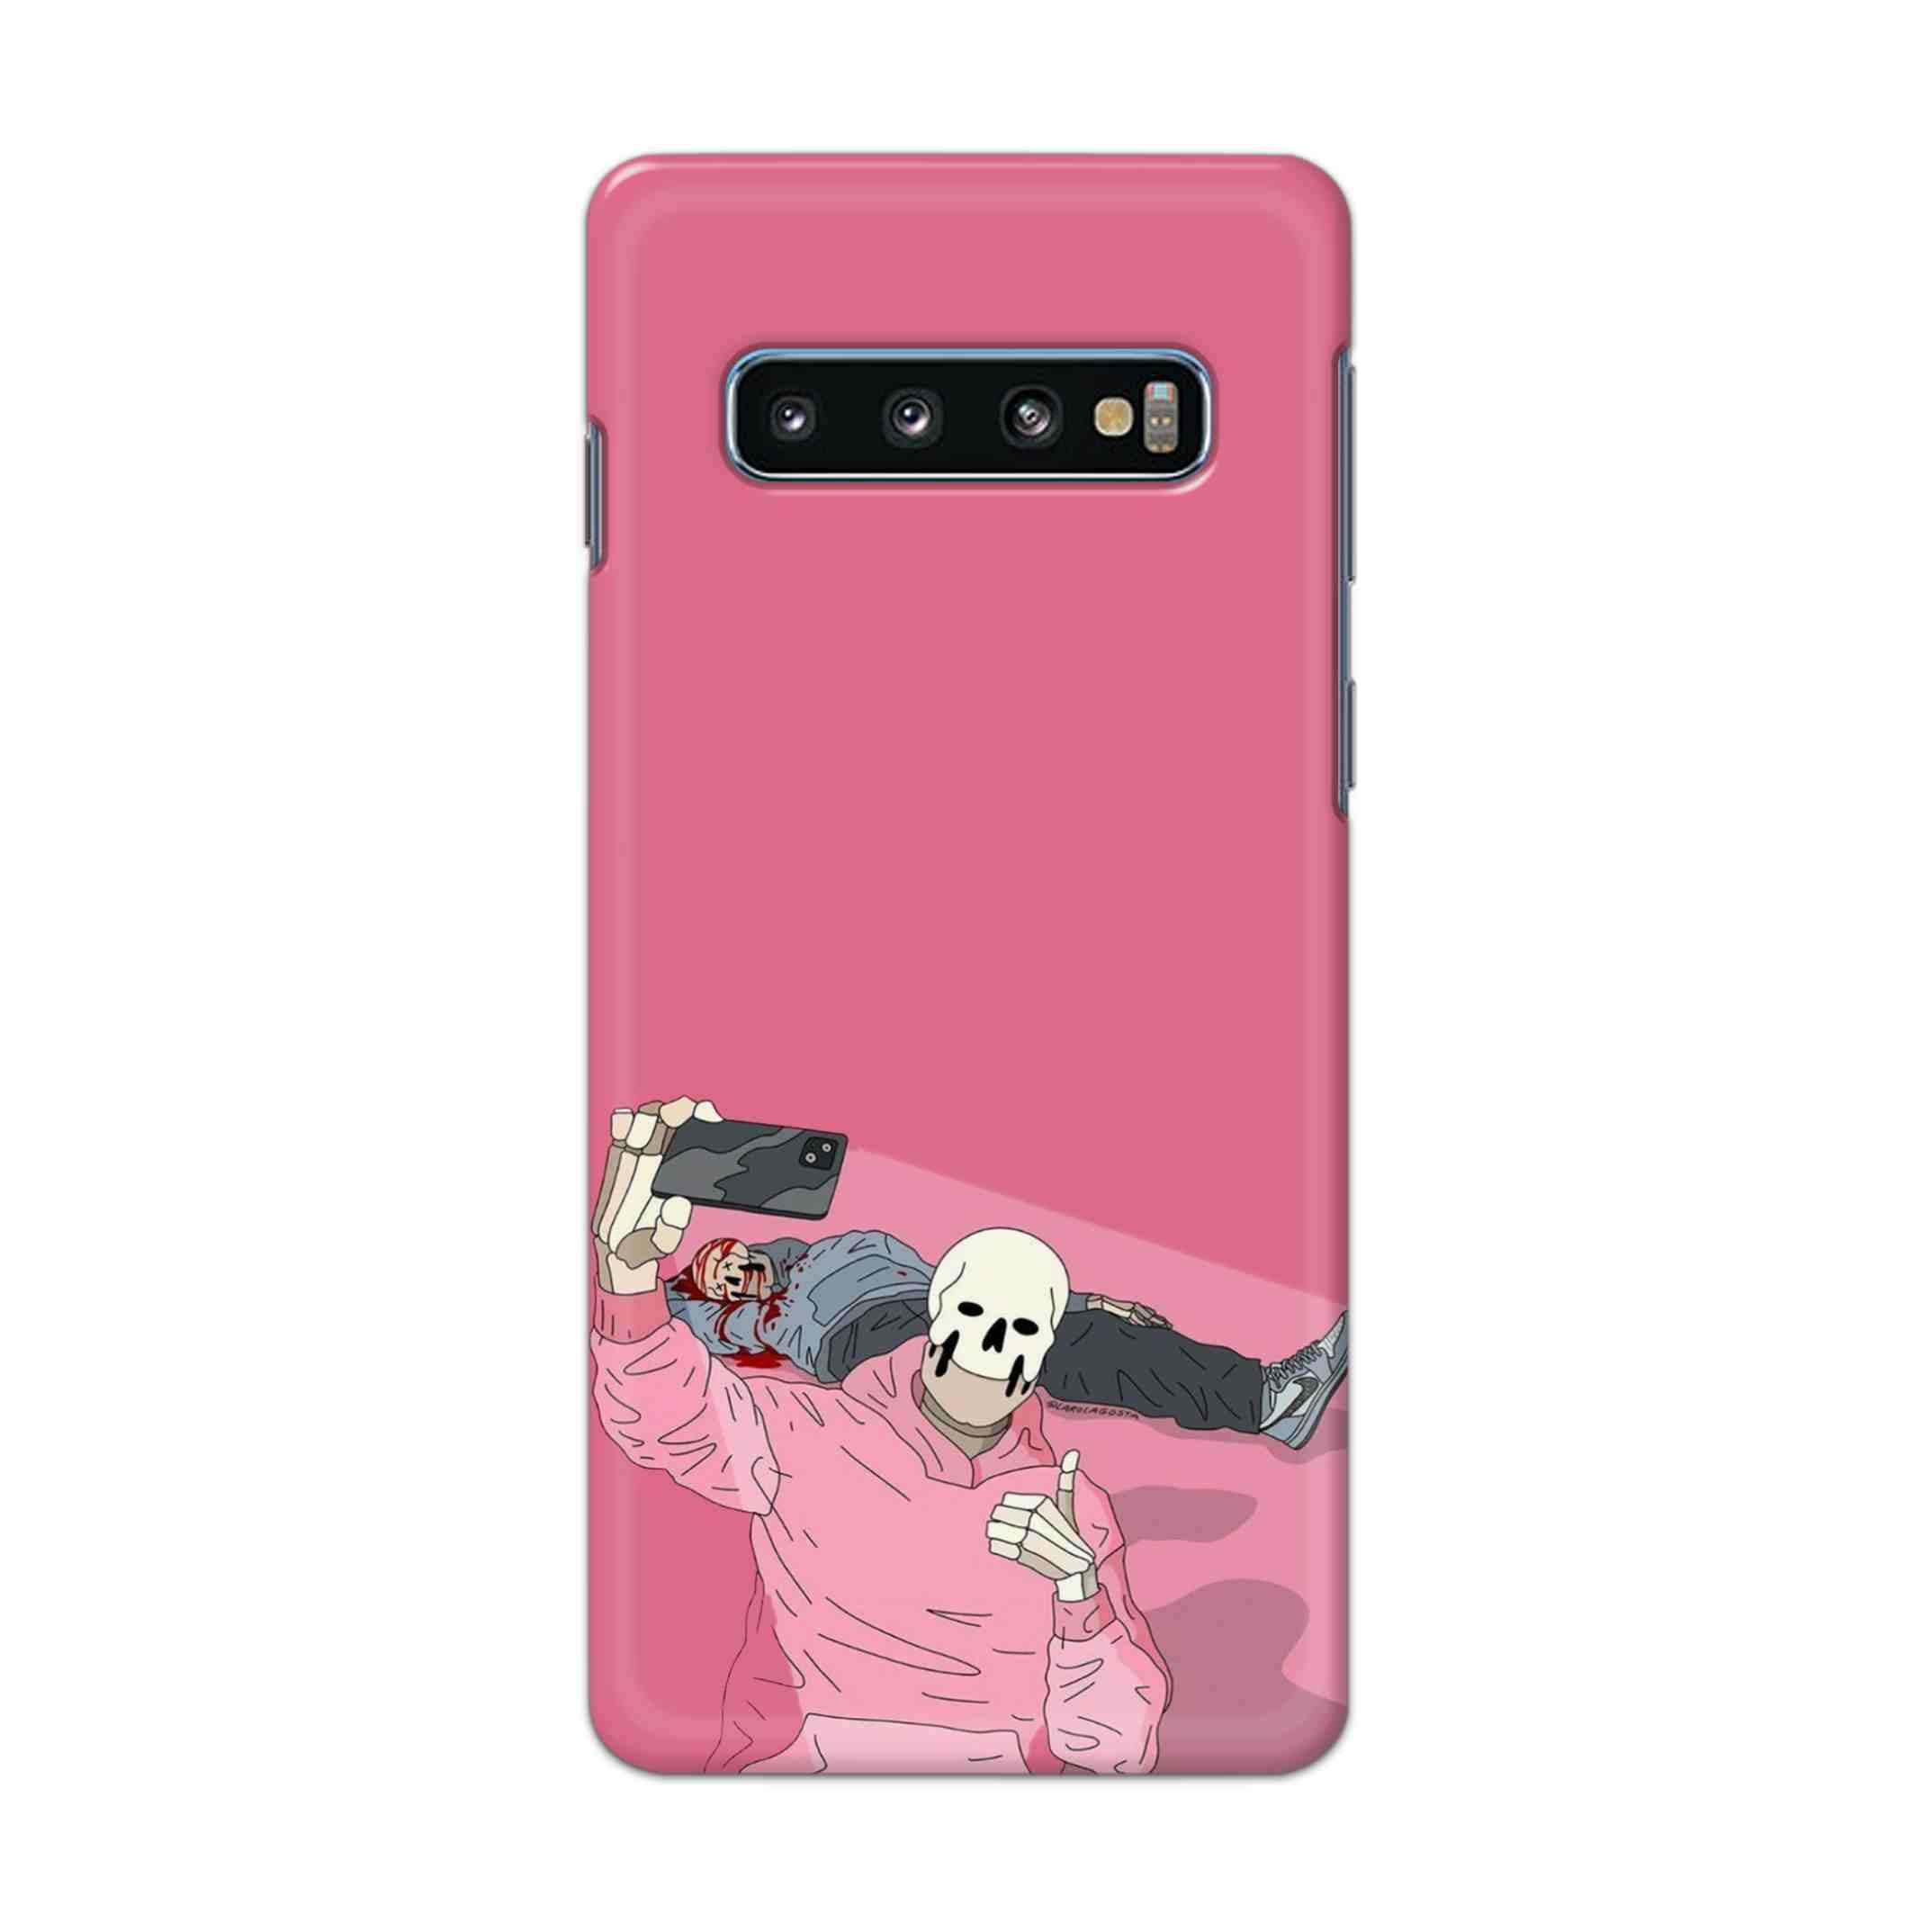 Buy Selfie Hard Back Mobile Phone Case Cover For Samsung Galaxy S10 Plus Online